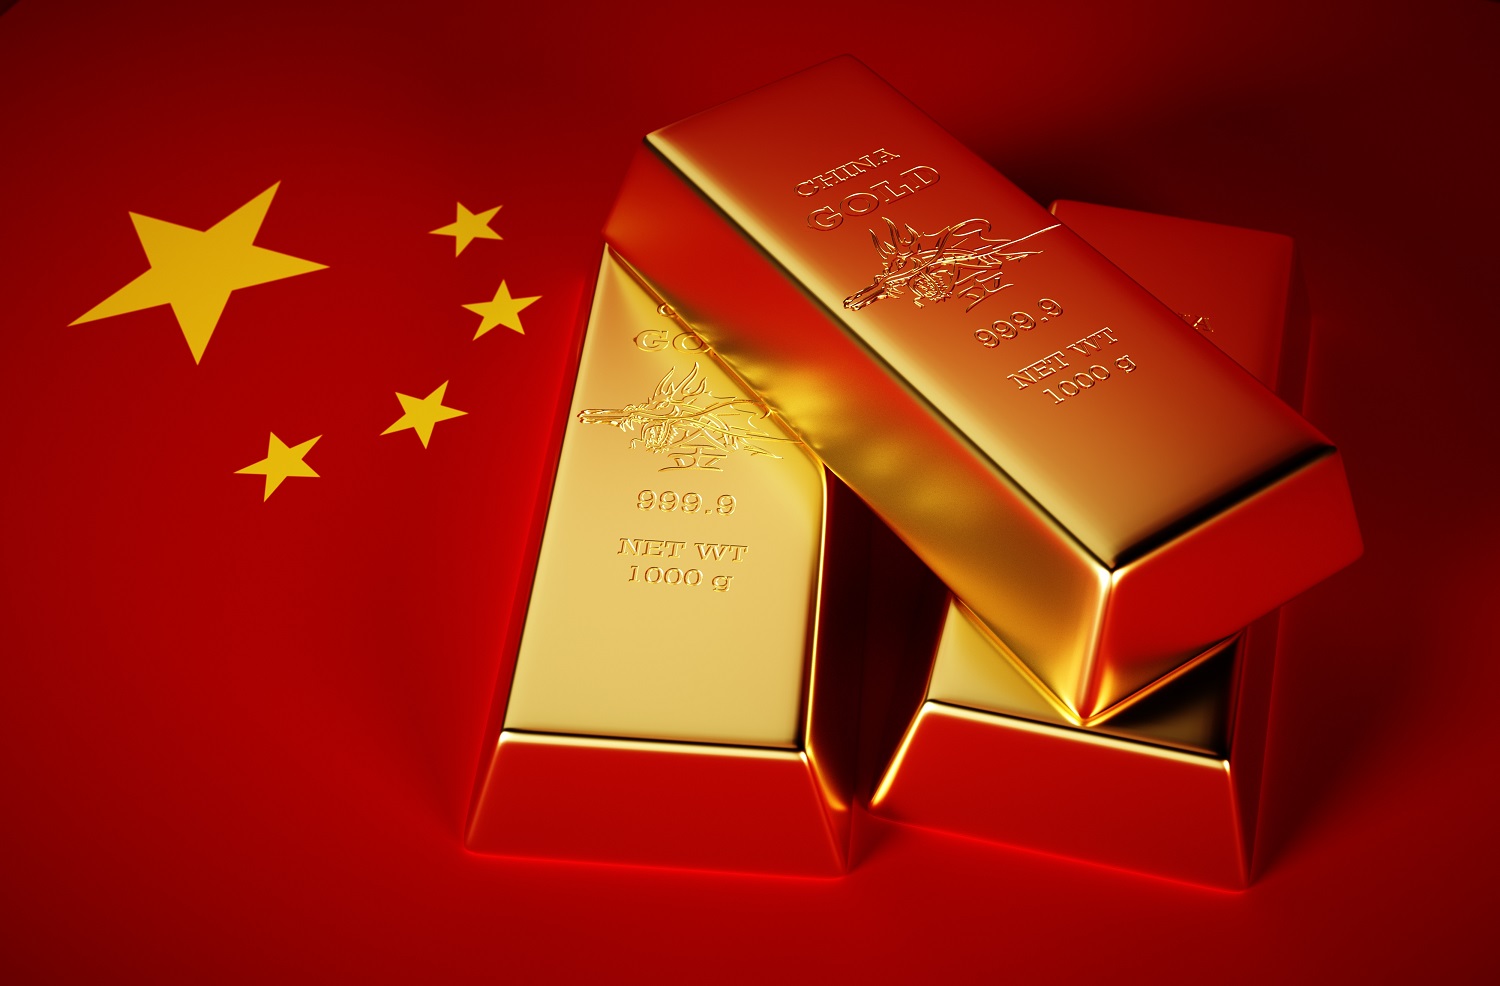 Gold bars against the background of the Chinese flag.